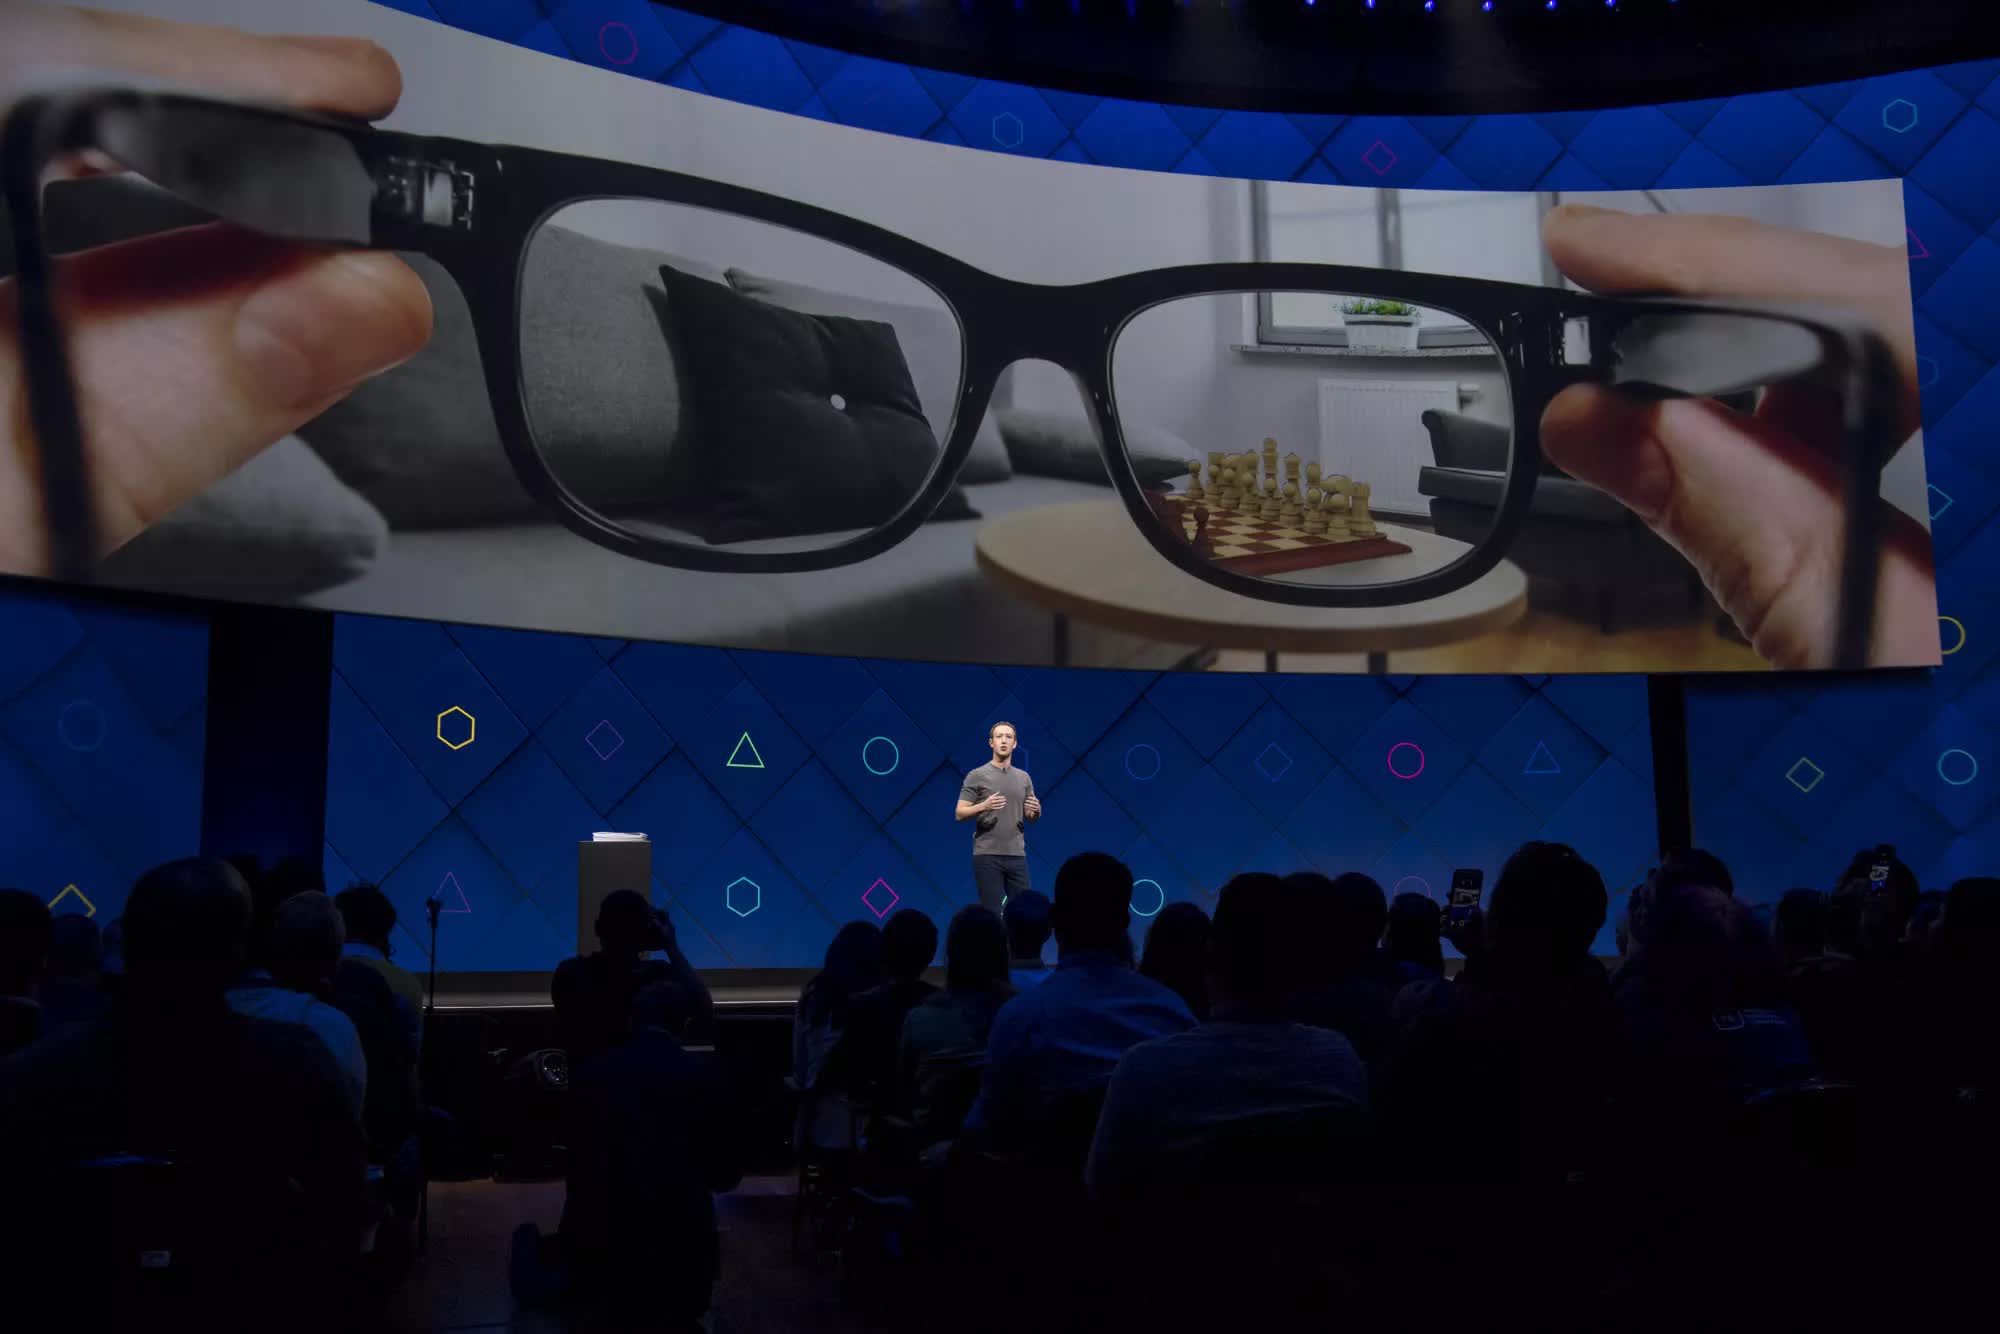 Mark Zuckerberg envisions a future where you could use AR glasses to teleport for in-person meetings